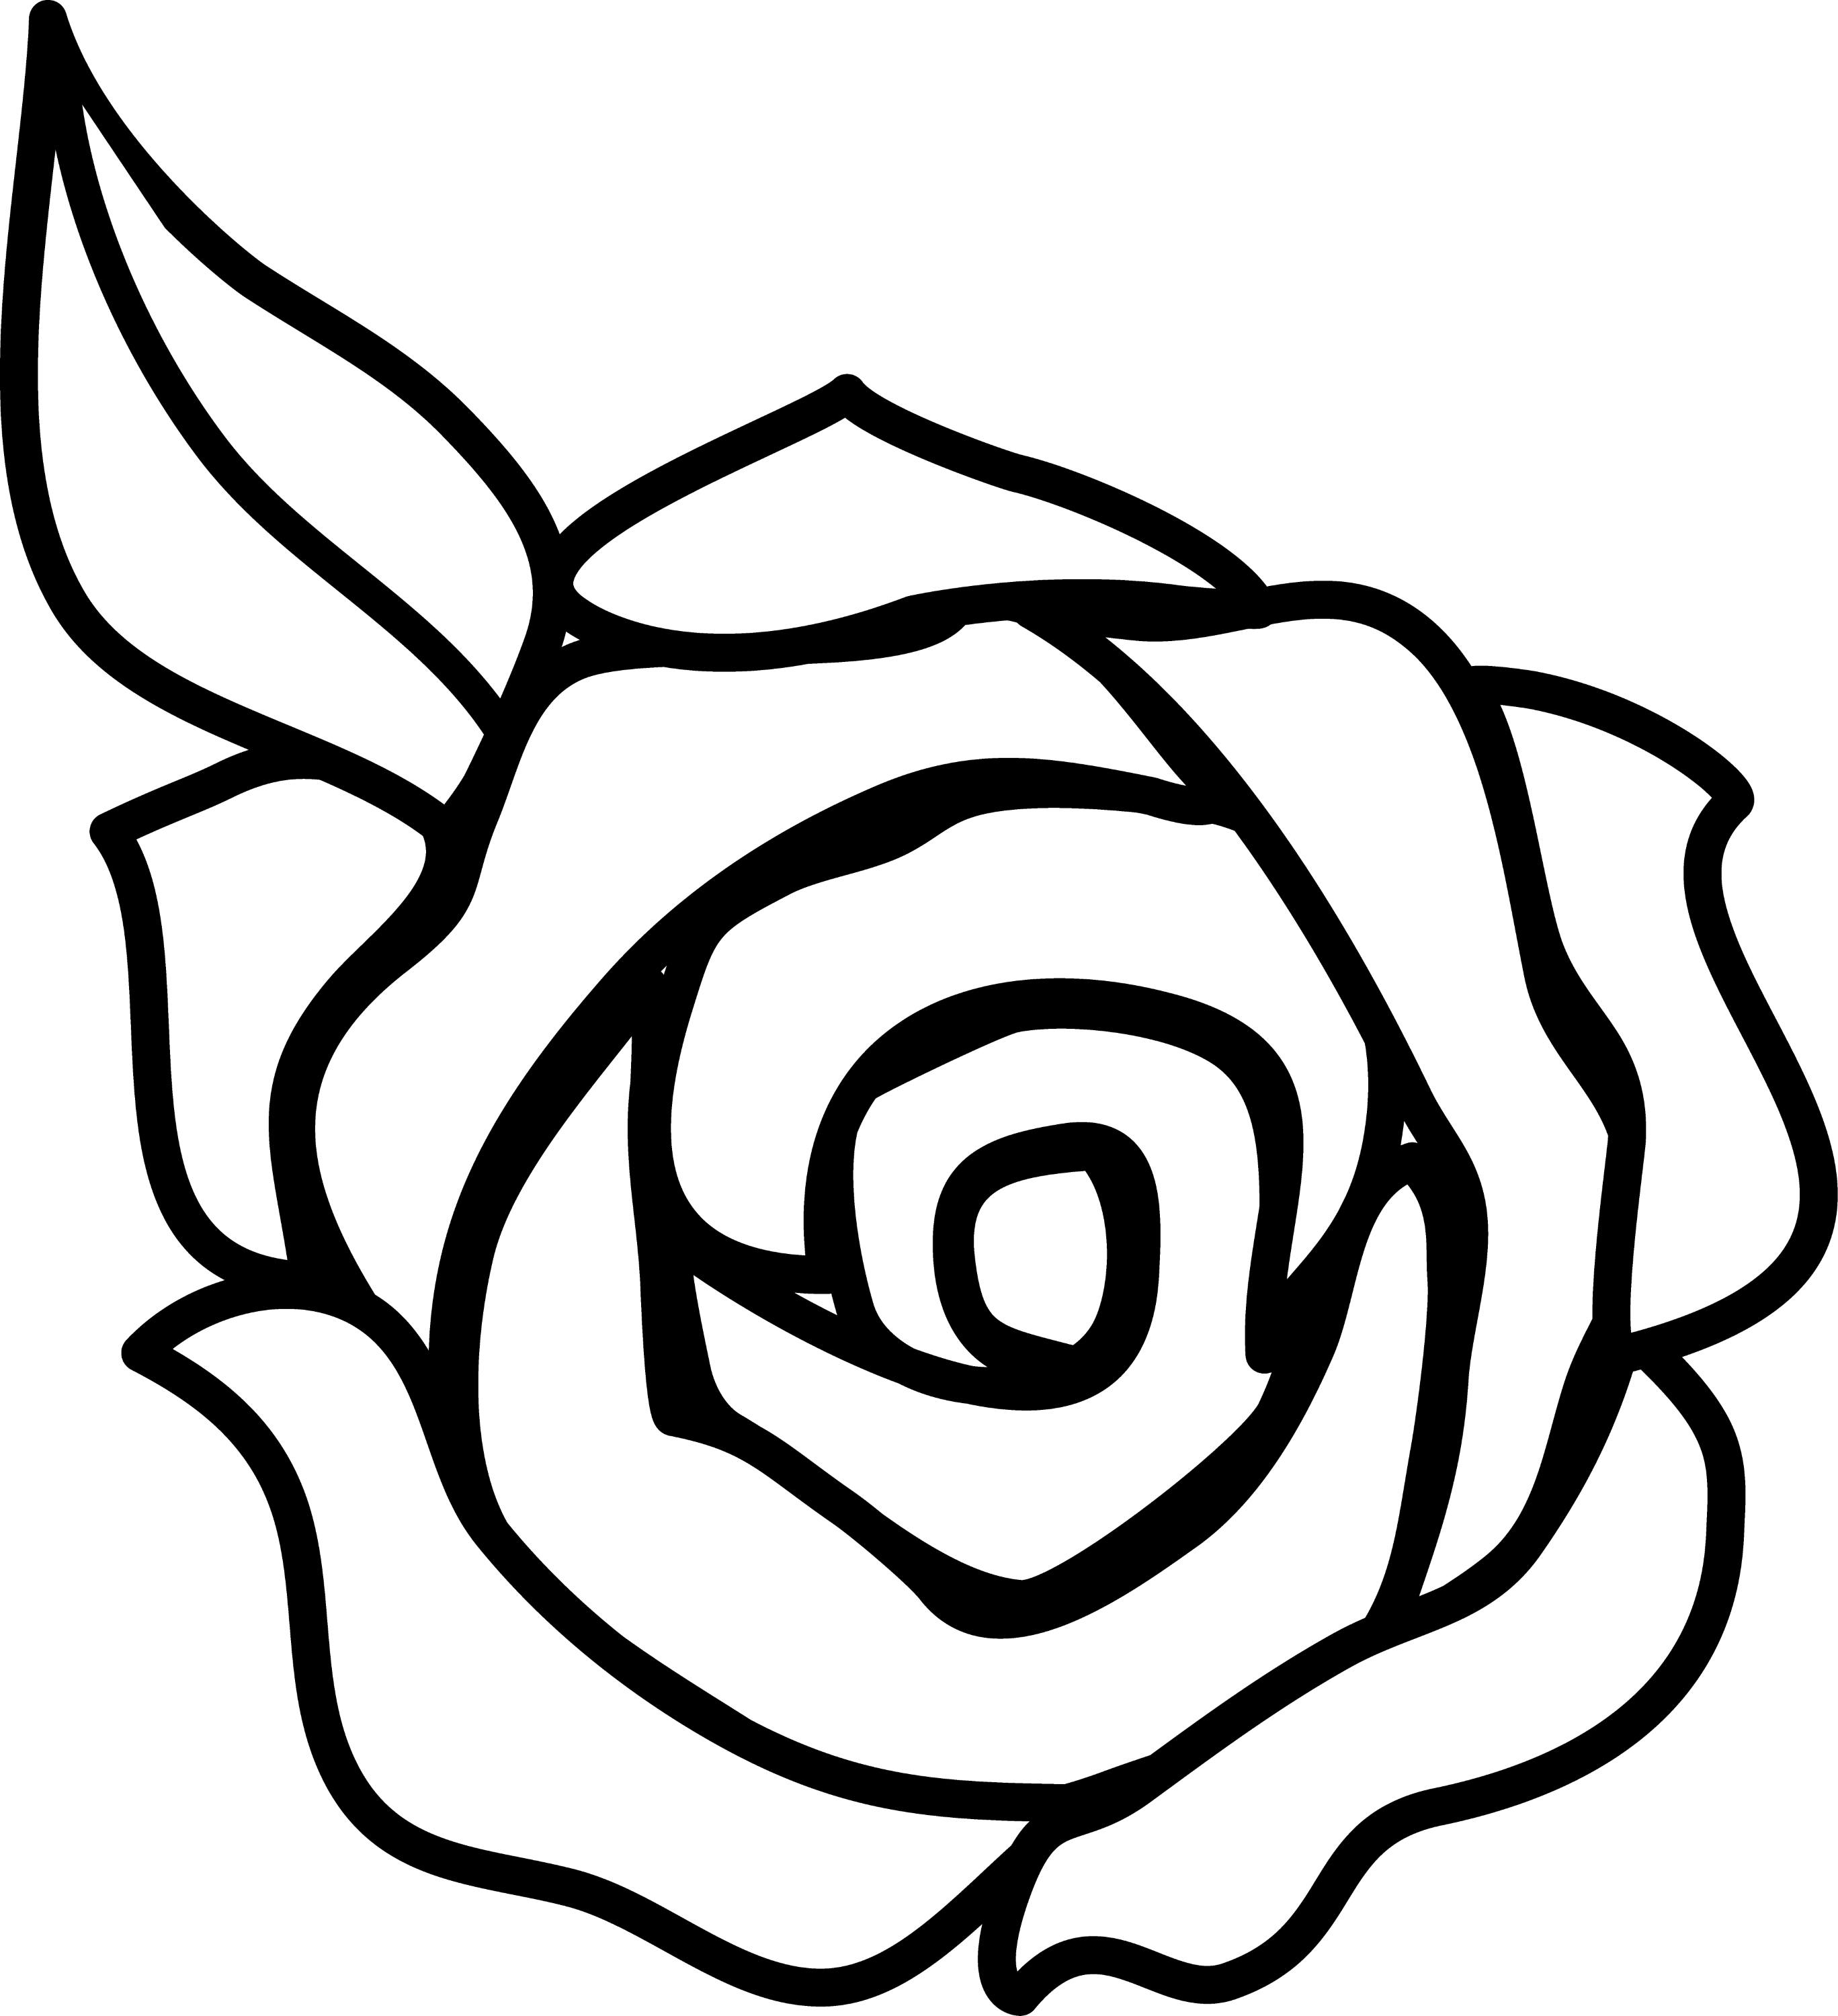 roses clipart black and white - photo #7